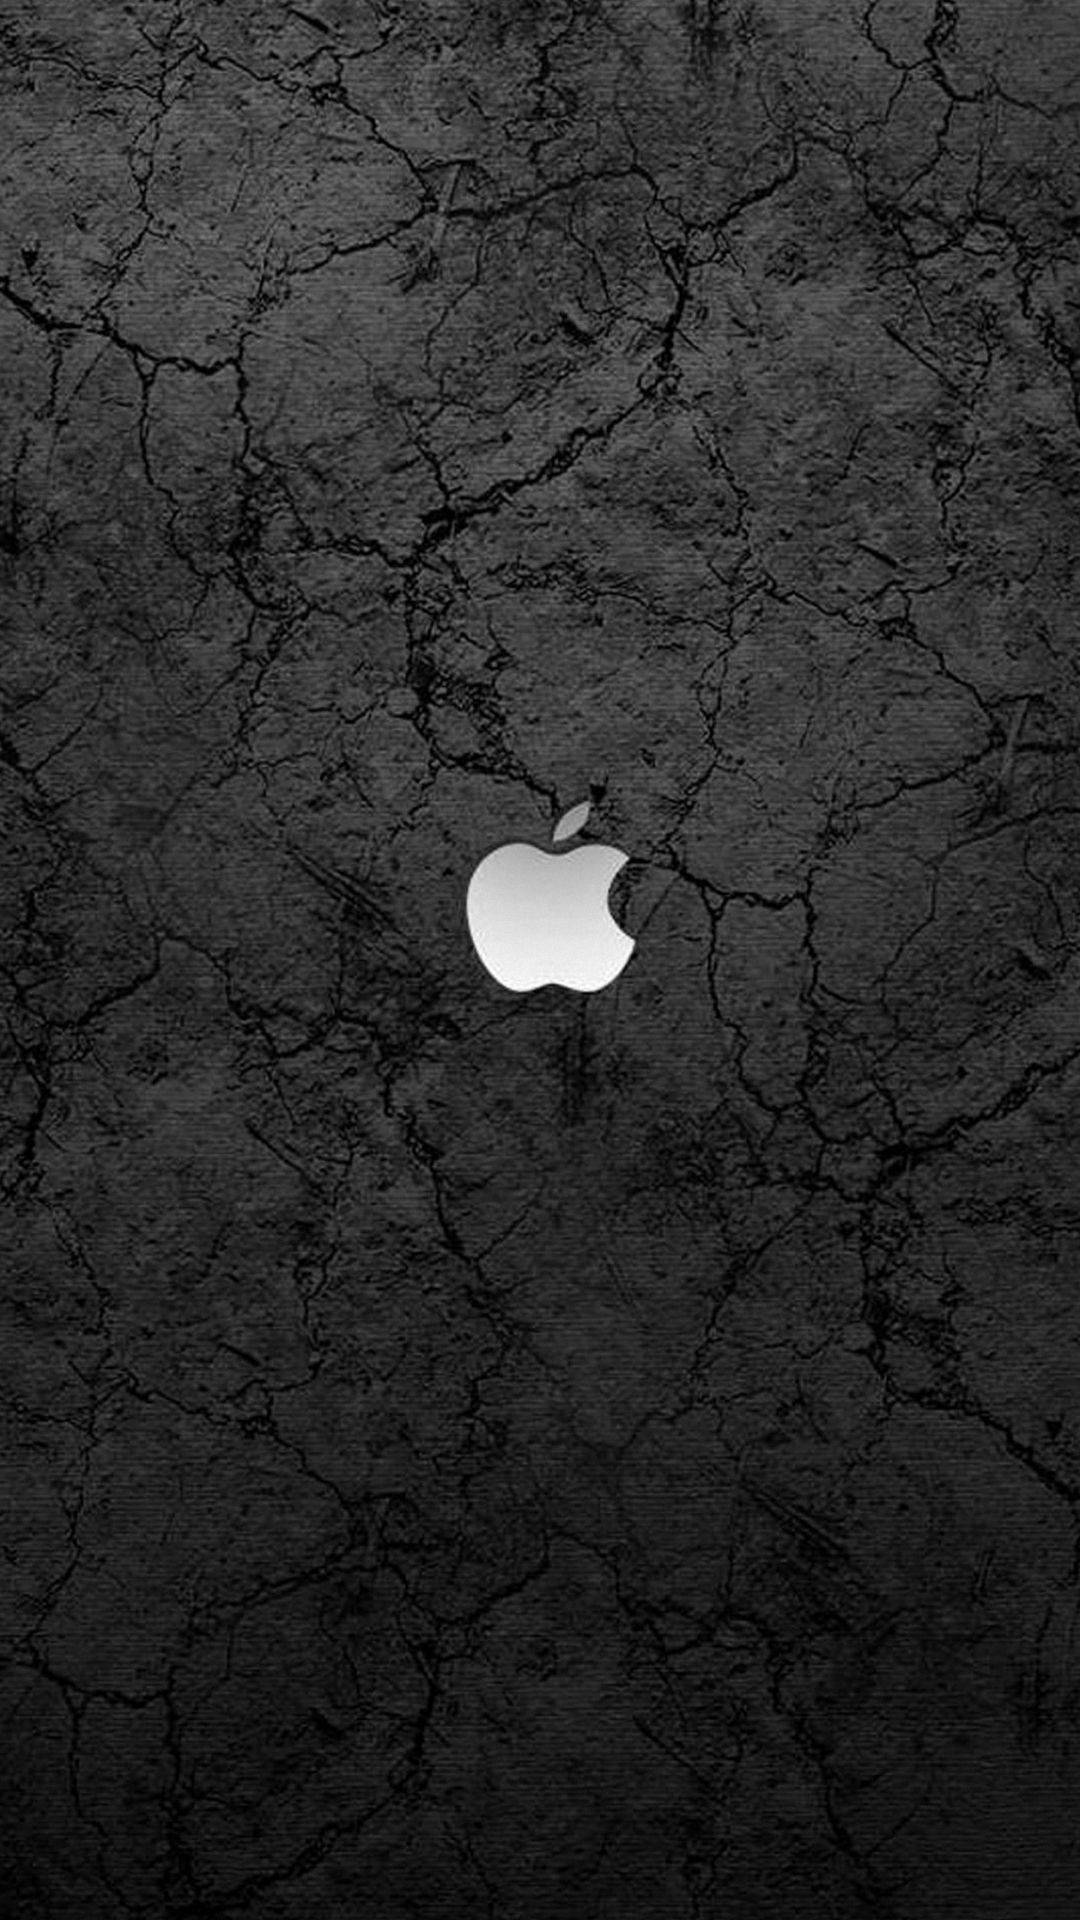 Strategically Placed Apple Logo Against A Cracked Concrete Backdrop. Background